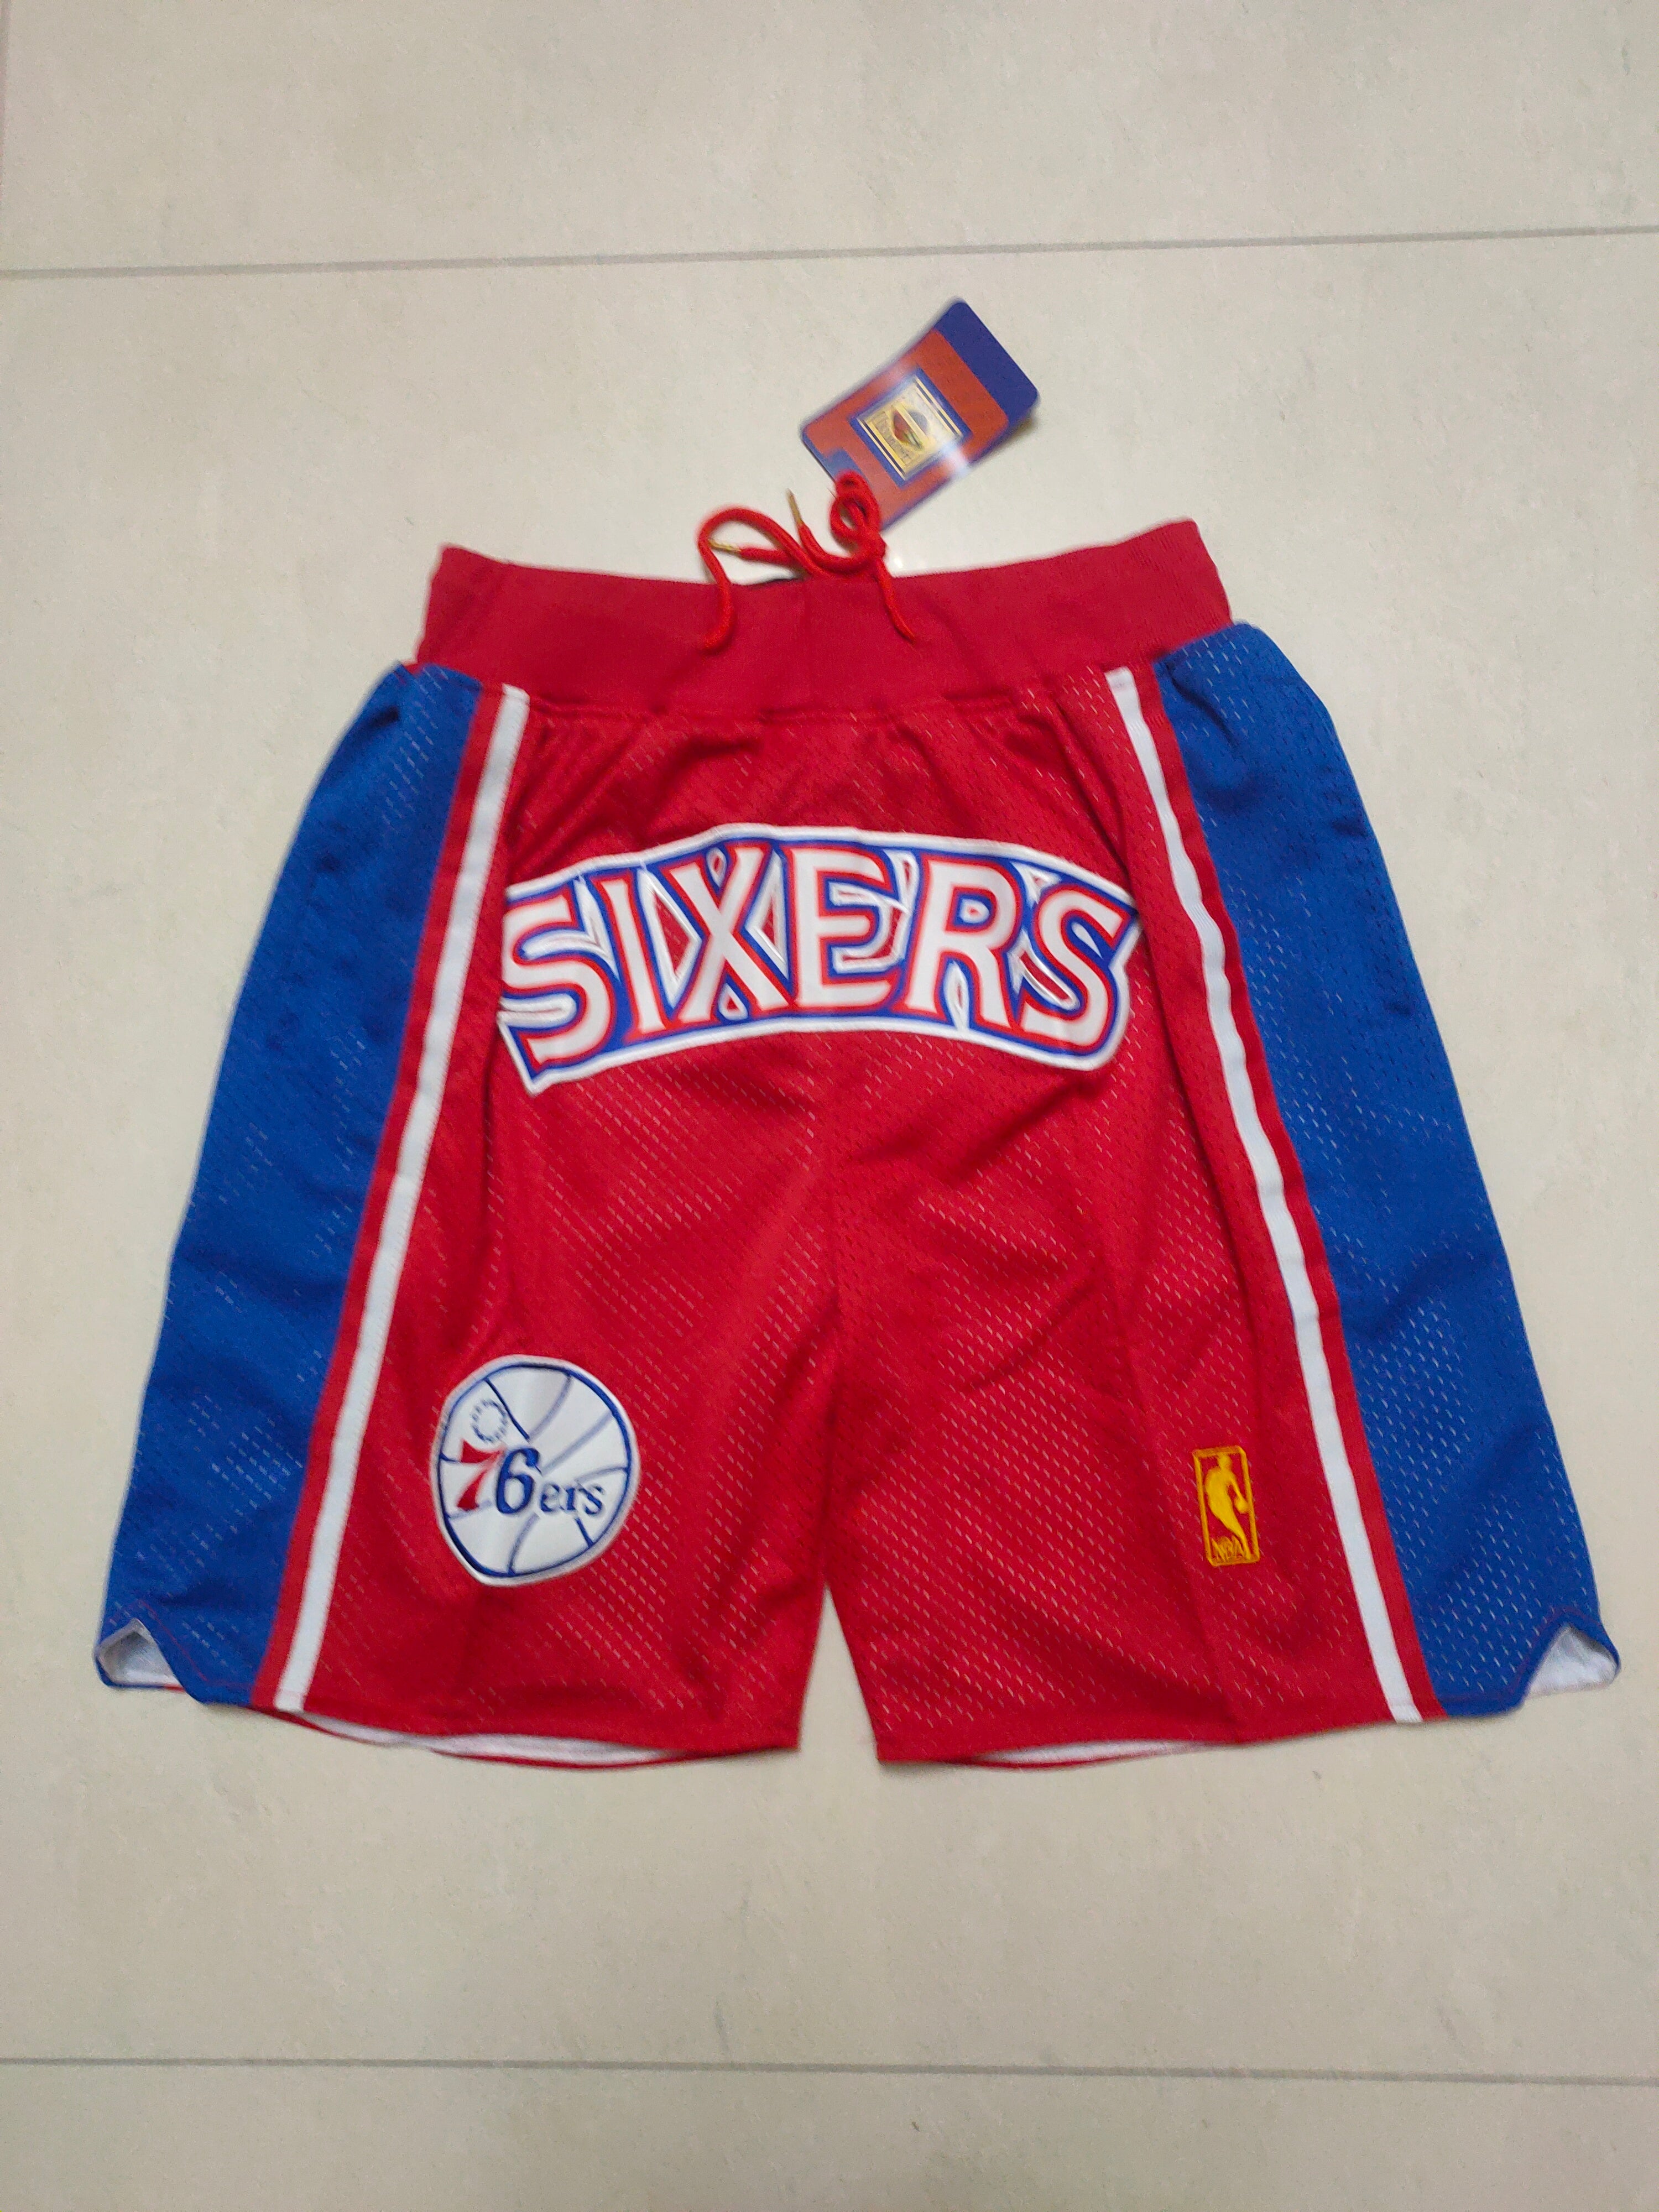 Sixers red/blue shorts